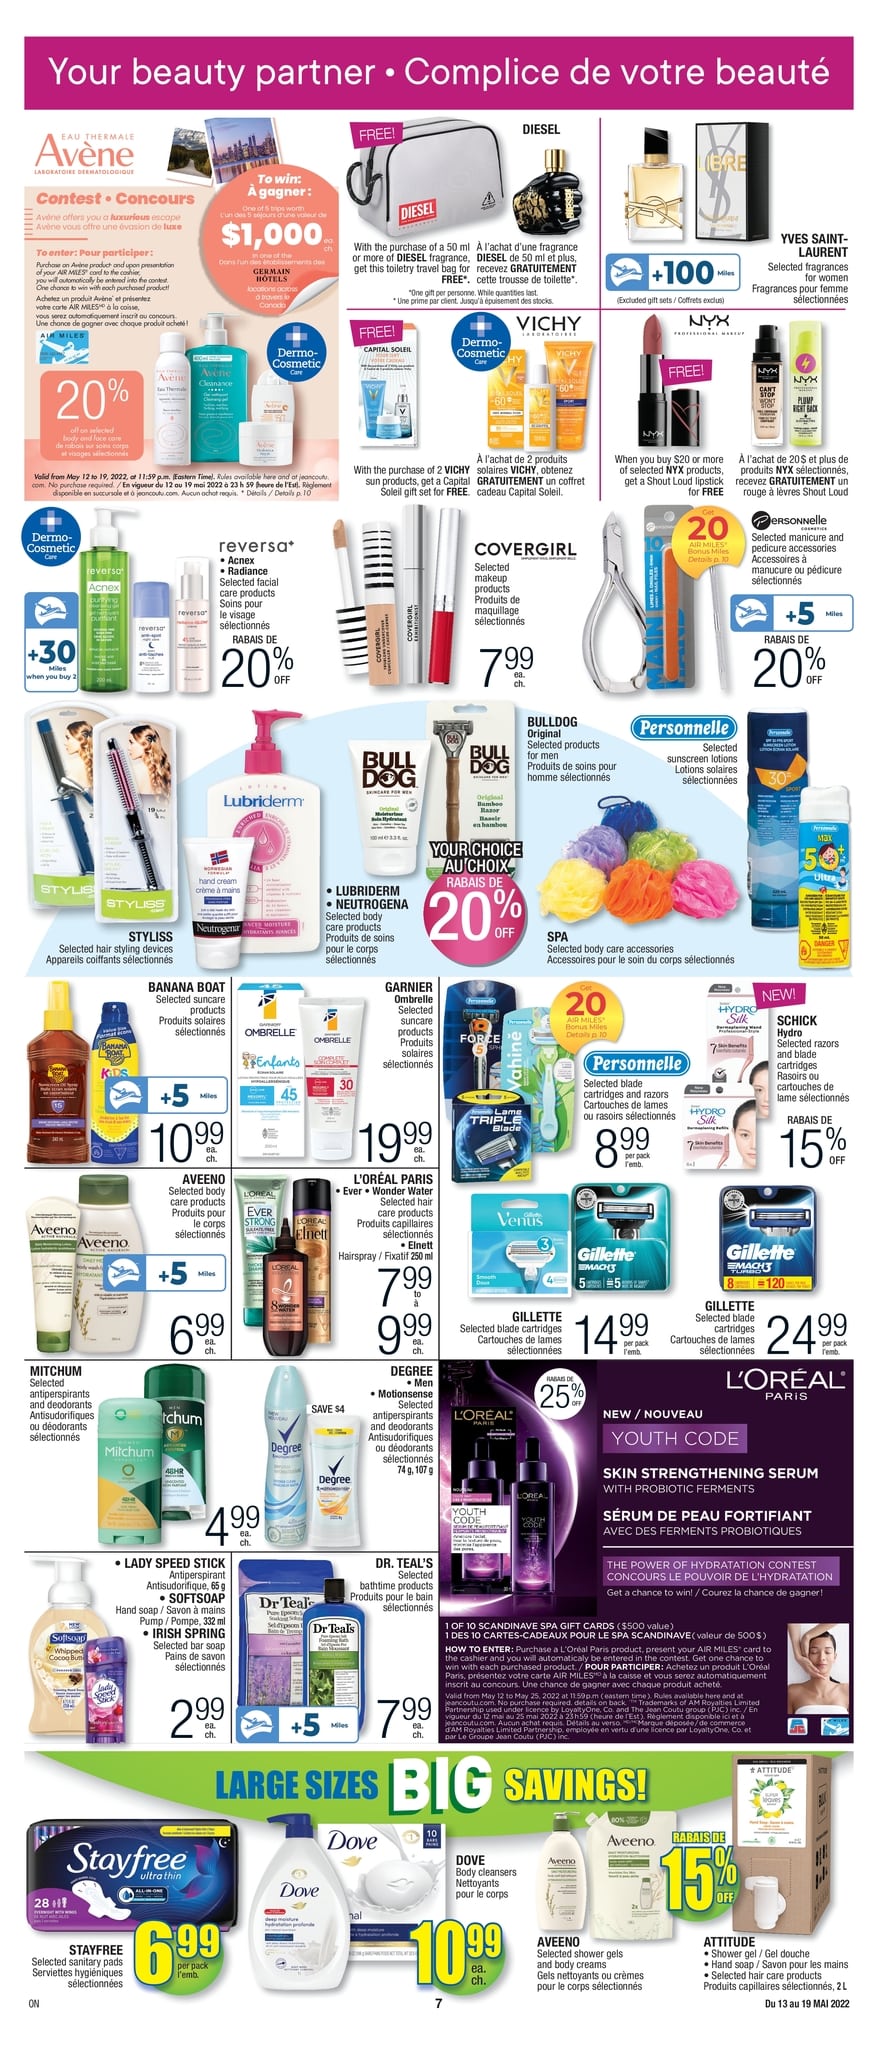 Jean Coutu - Weekly Flyer Specials - Page 7